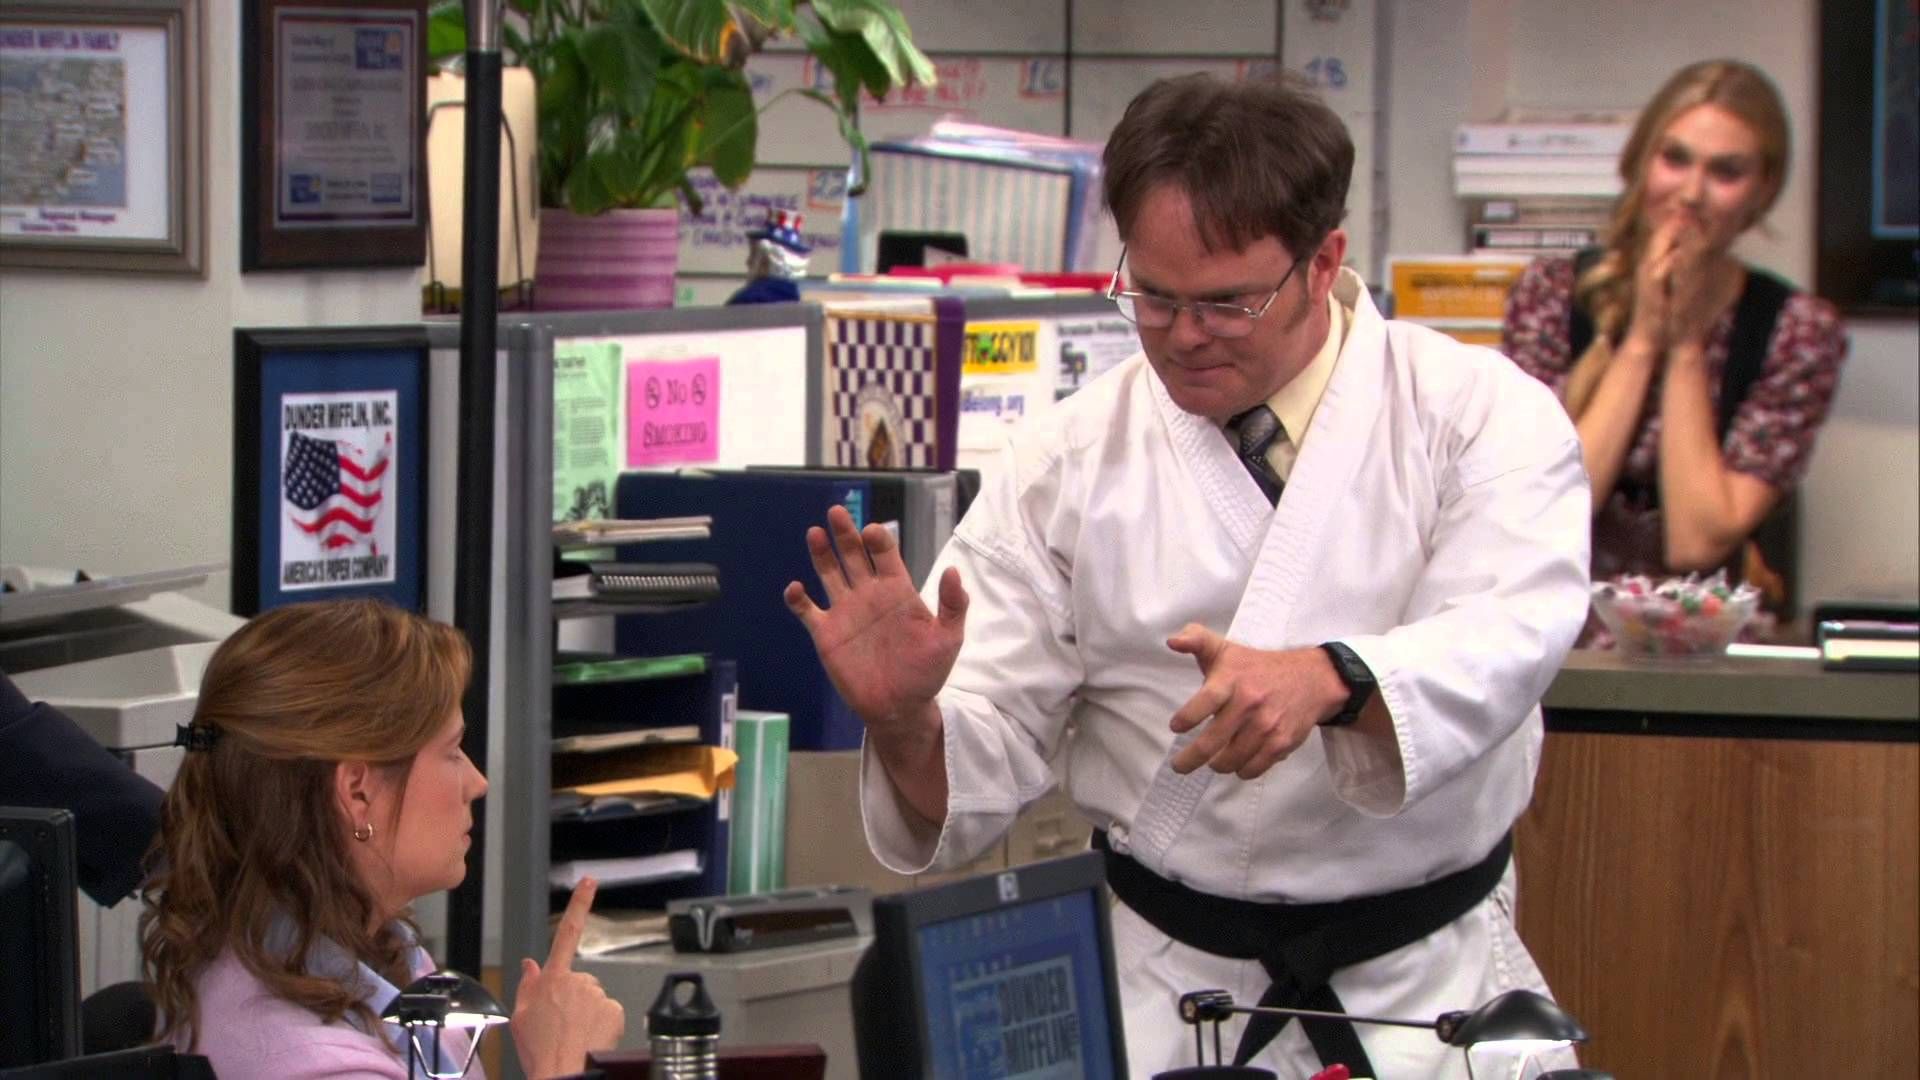 Dwight showing off his Karate in The Office